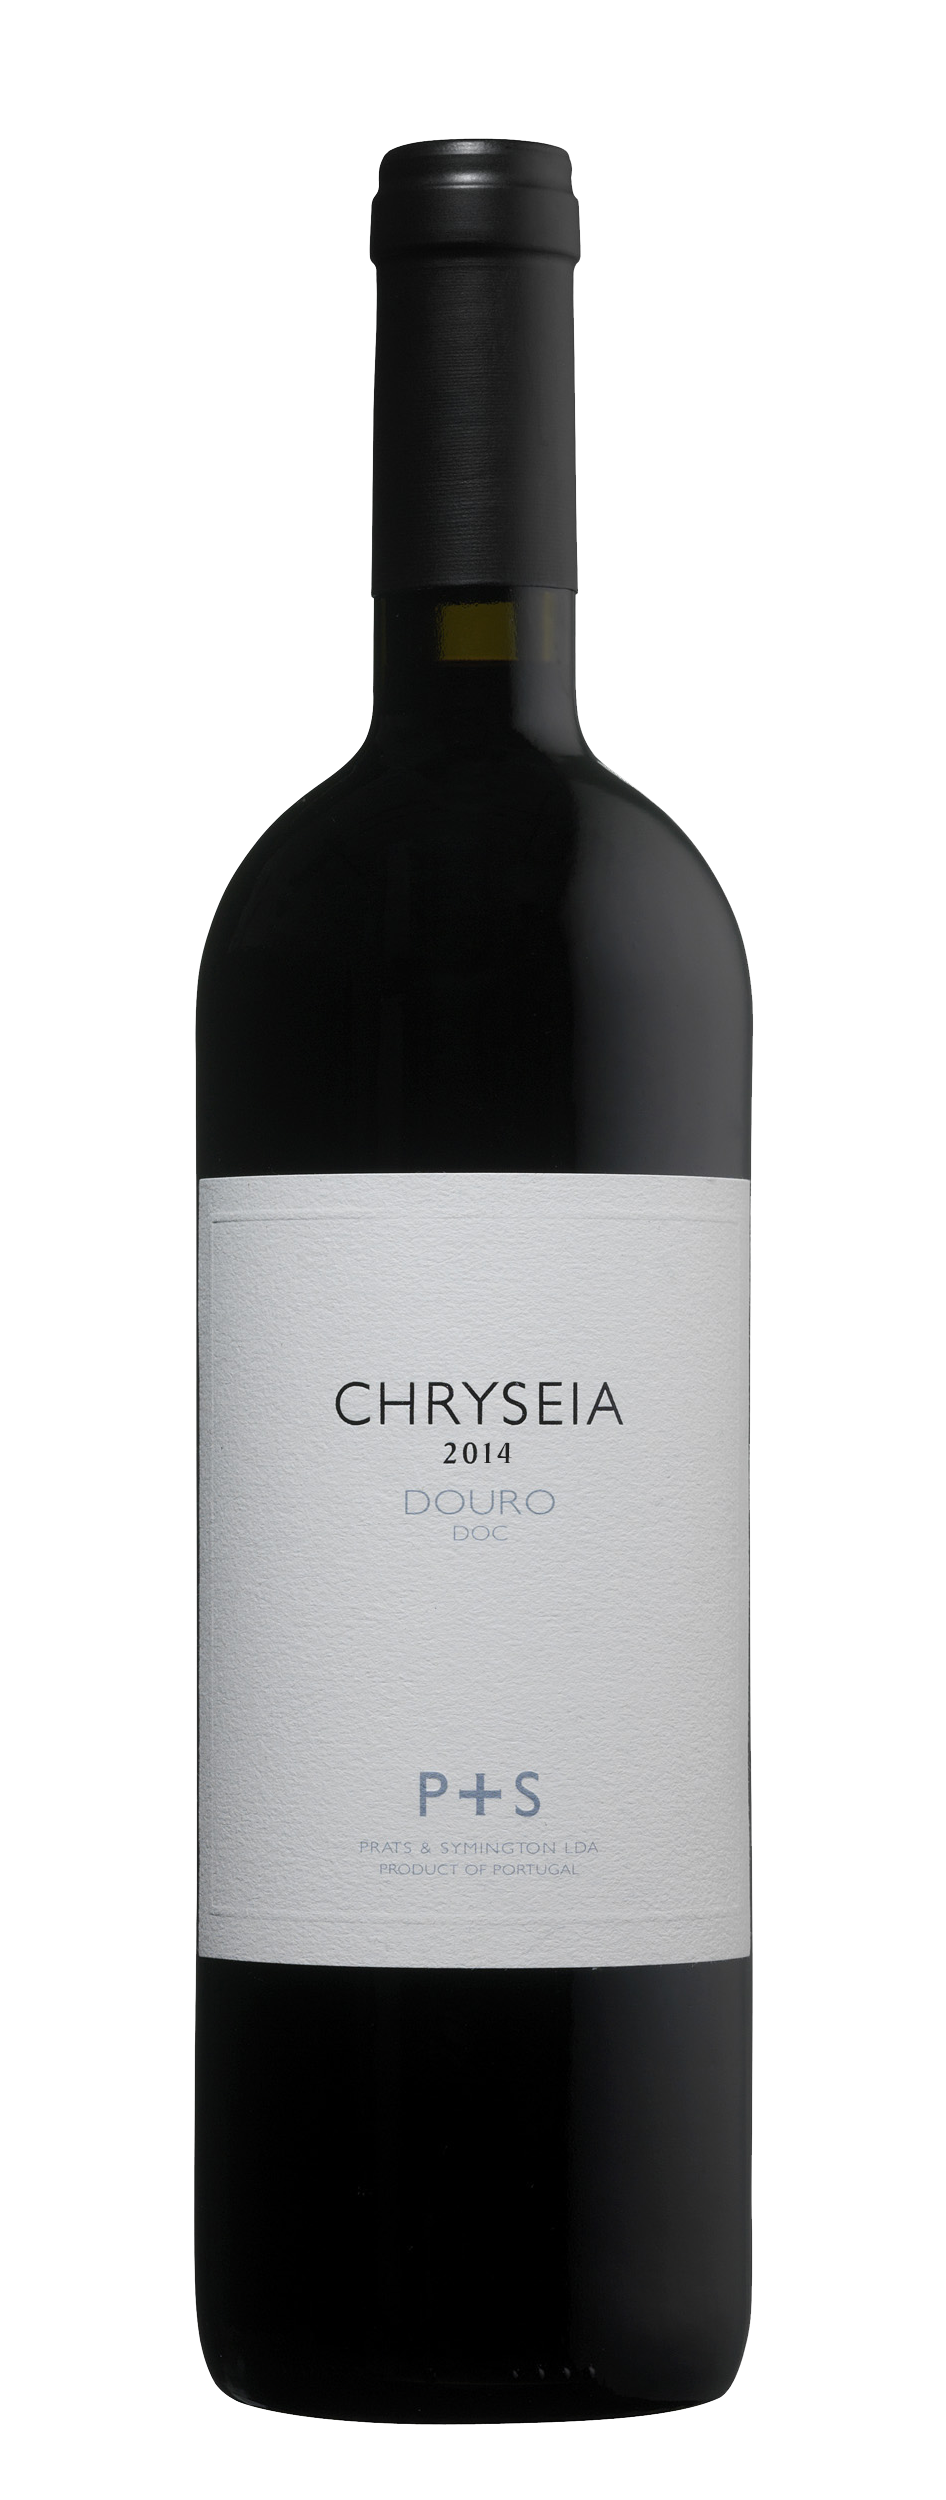 Product Image for P&S CHRYSEIA DOURO RED 2014 - MAGNUM (1.5L)